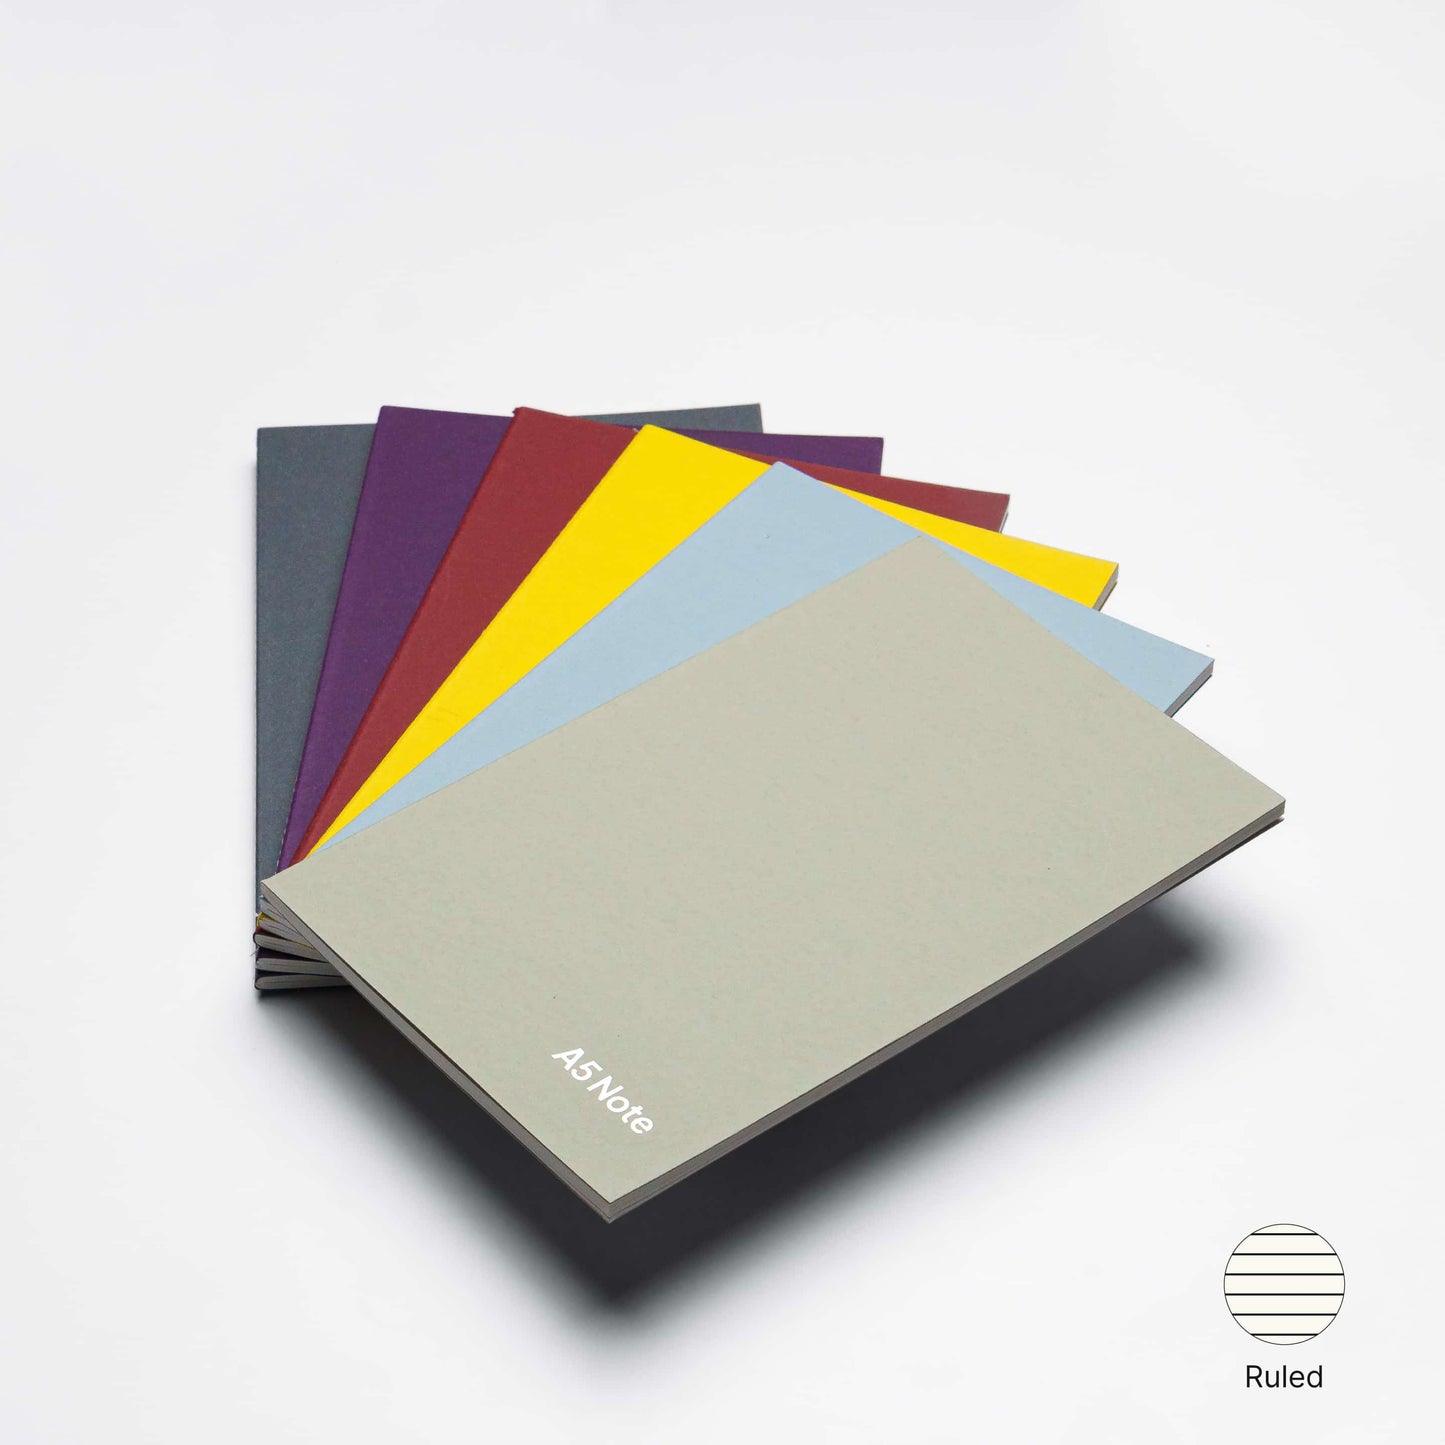 A5 Note Ruled by Roda In 6 Color Set. Colour Collection. 64 Pages. Rodanotes / Roda Notes